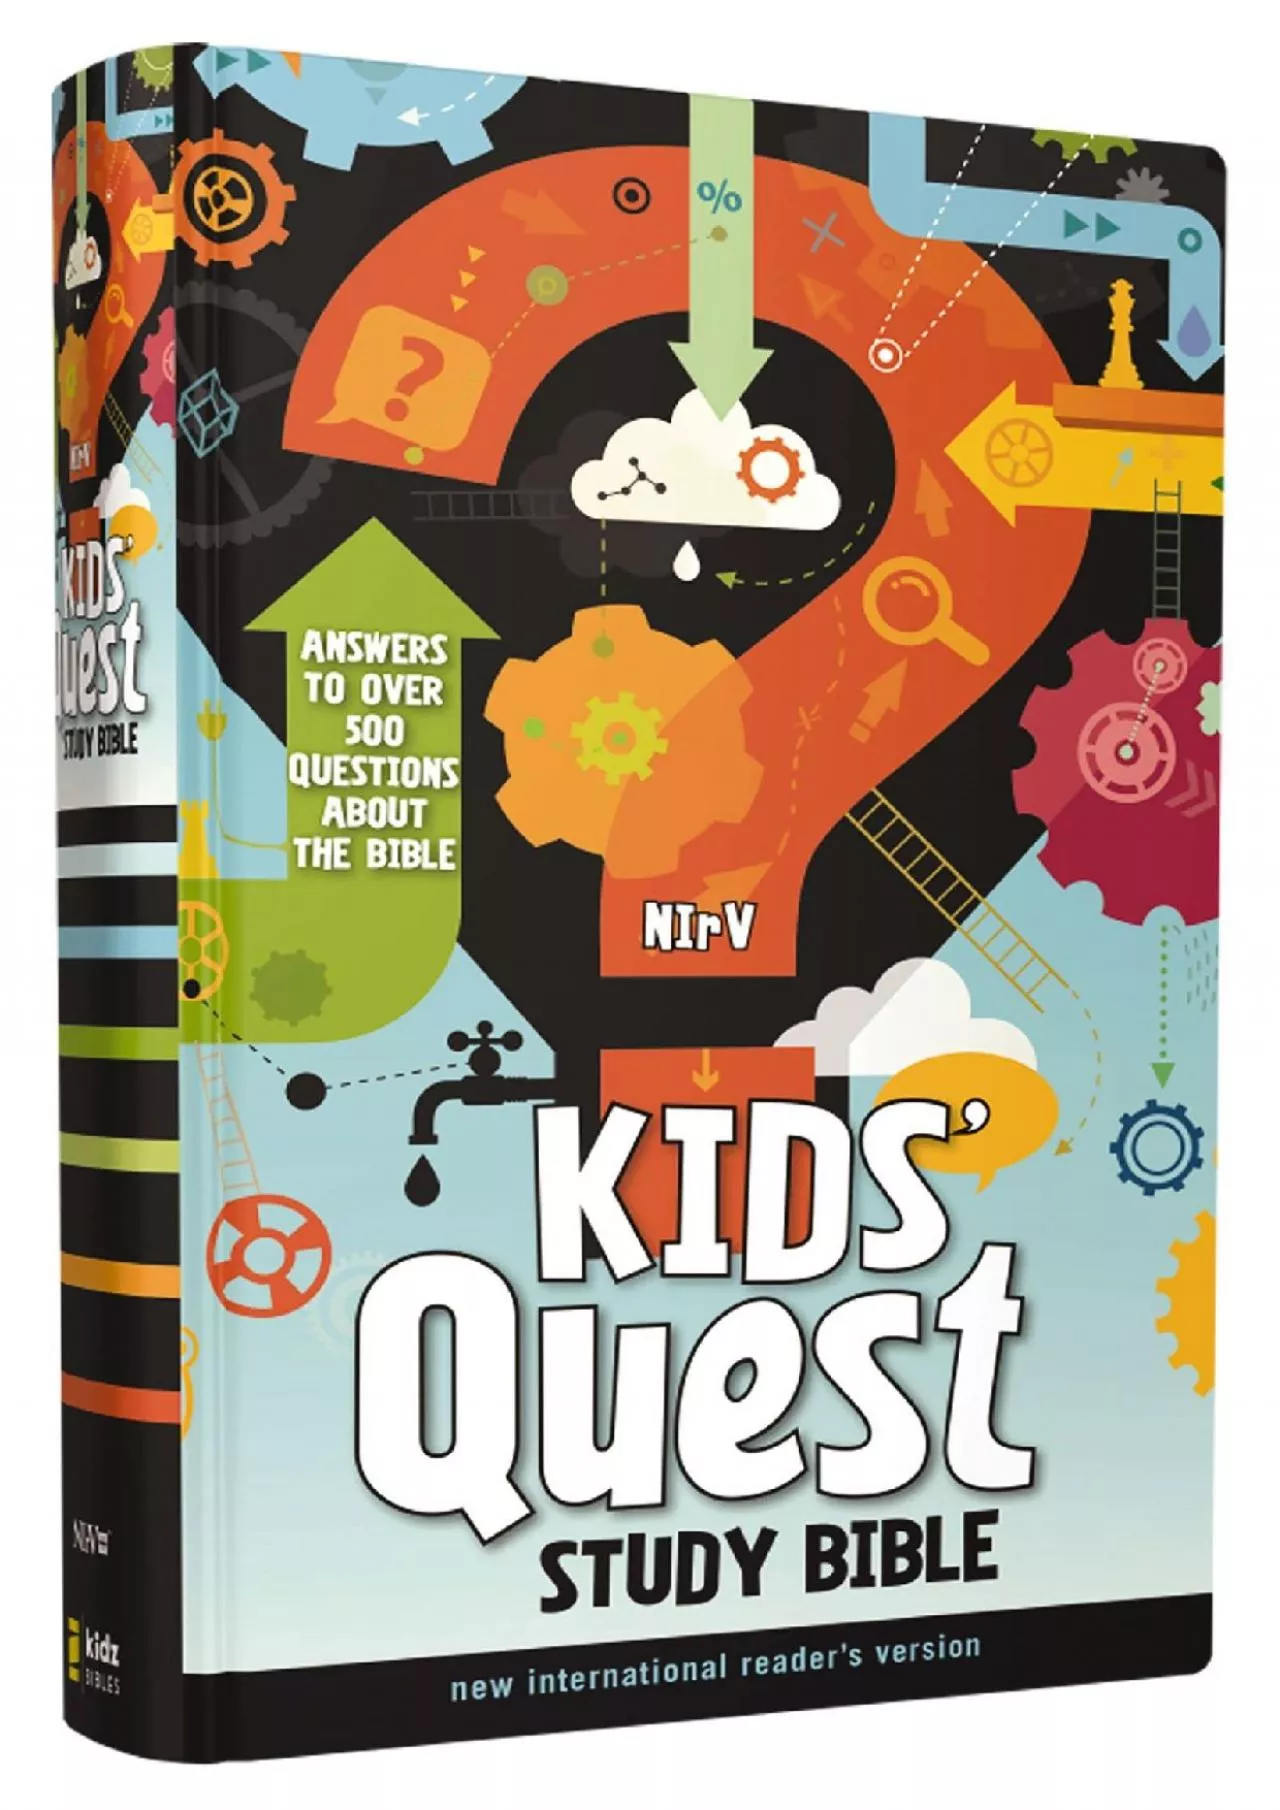 [EBOOK] NIrV Kids Quest Study Bible Hardcover: Answers to over 500 Questions about the